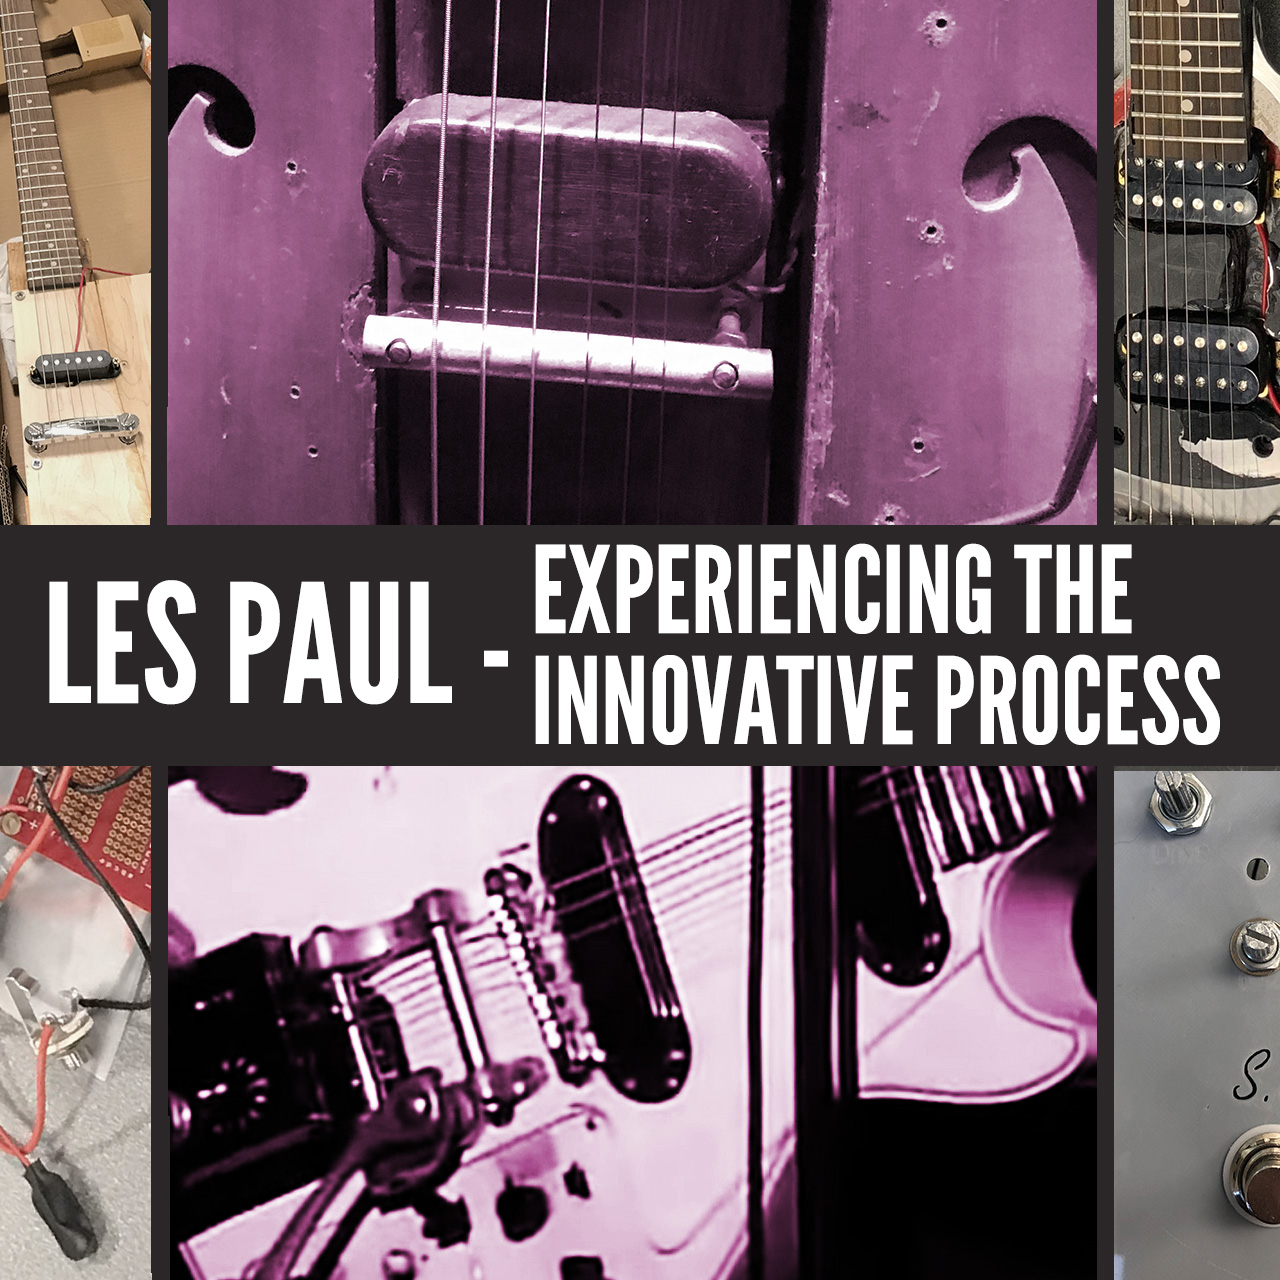 Les Paul Experiencing the Innovative Process